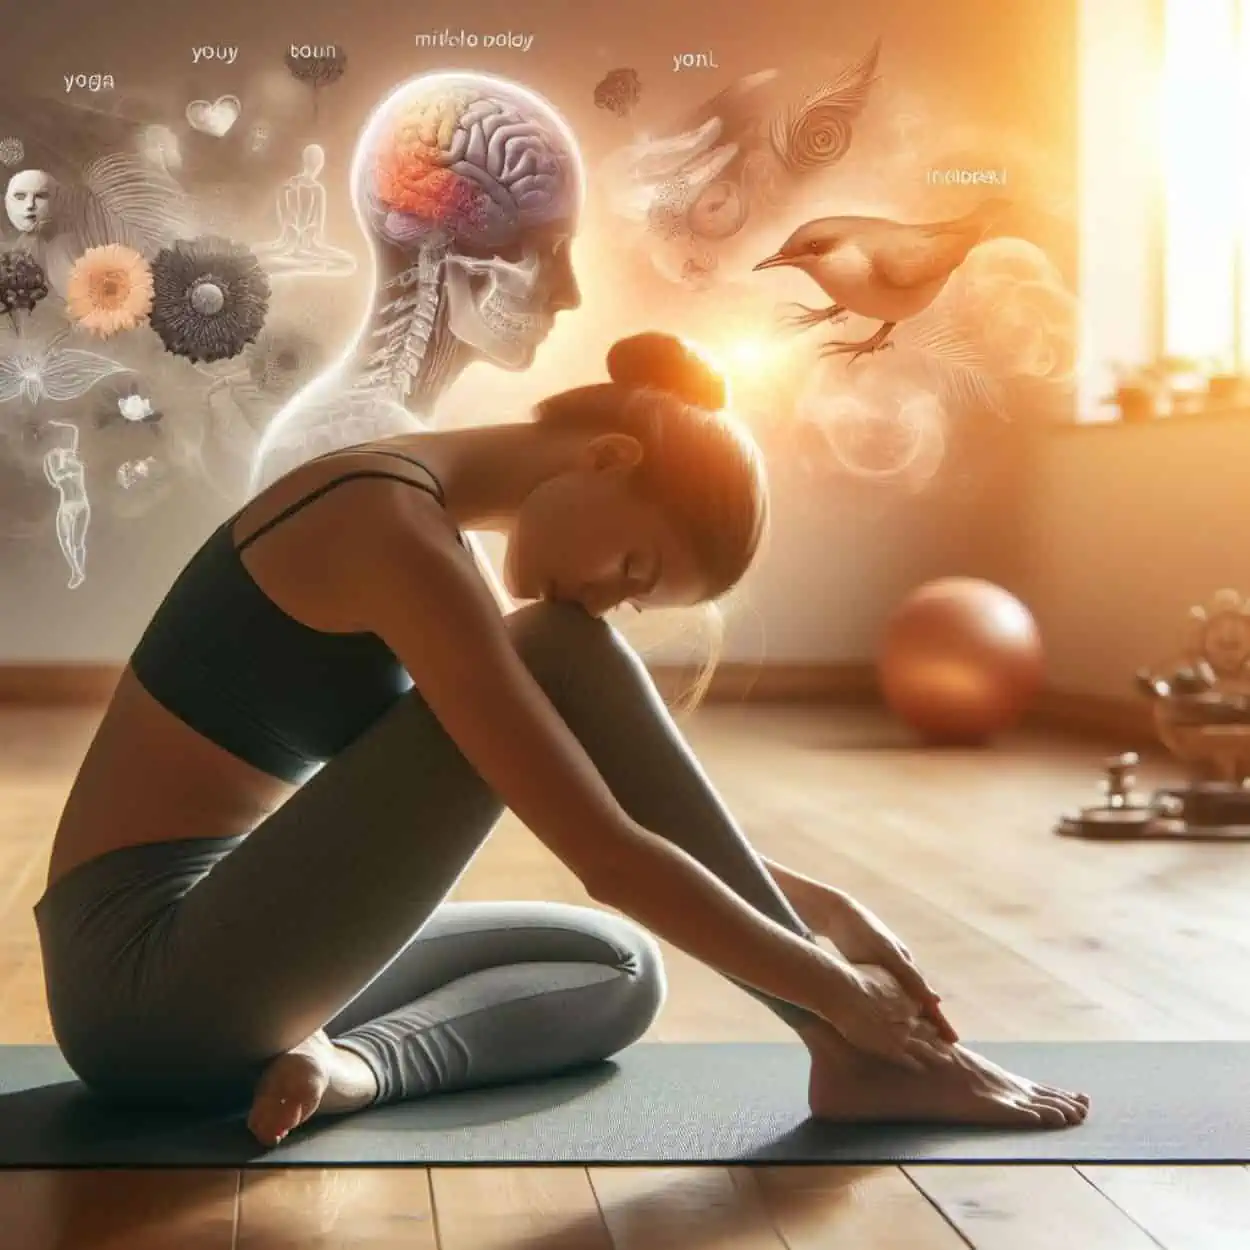 In this image a girl is doing yin yoga to balance mind and body